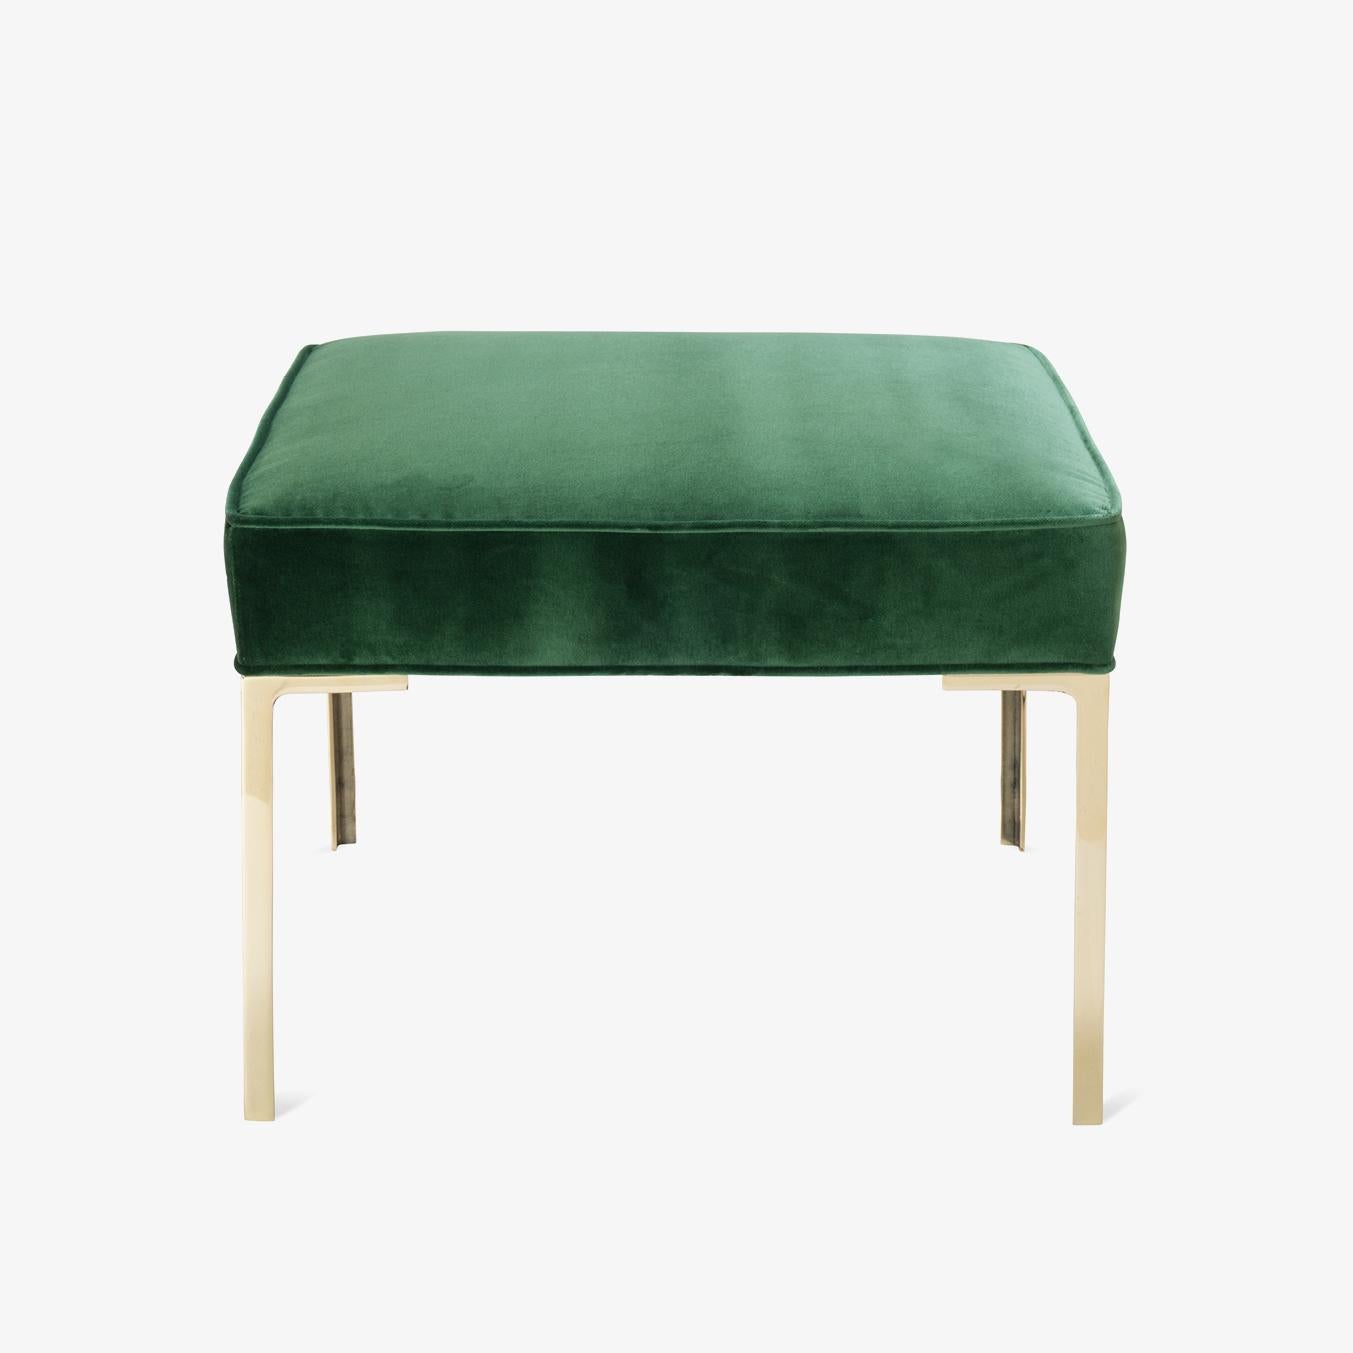 Designed by Montage, the Astor Square Ottoman is a wonderful addition to a refined interior space. This Ottoman's generous square proportions stand alone elegantly or accompanying a sofa. Astor was designed with the delicate proportions of the